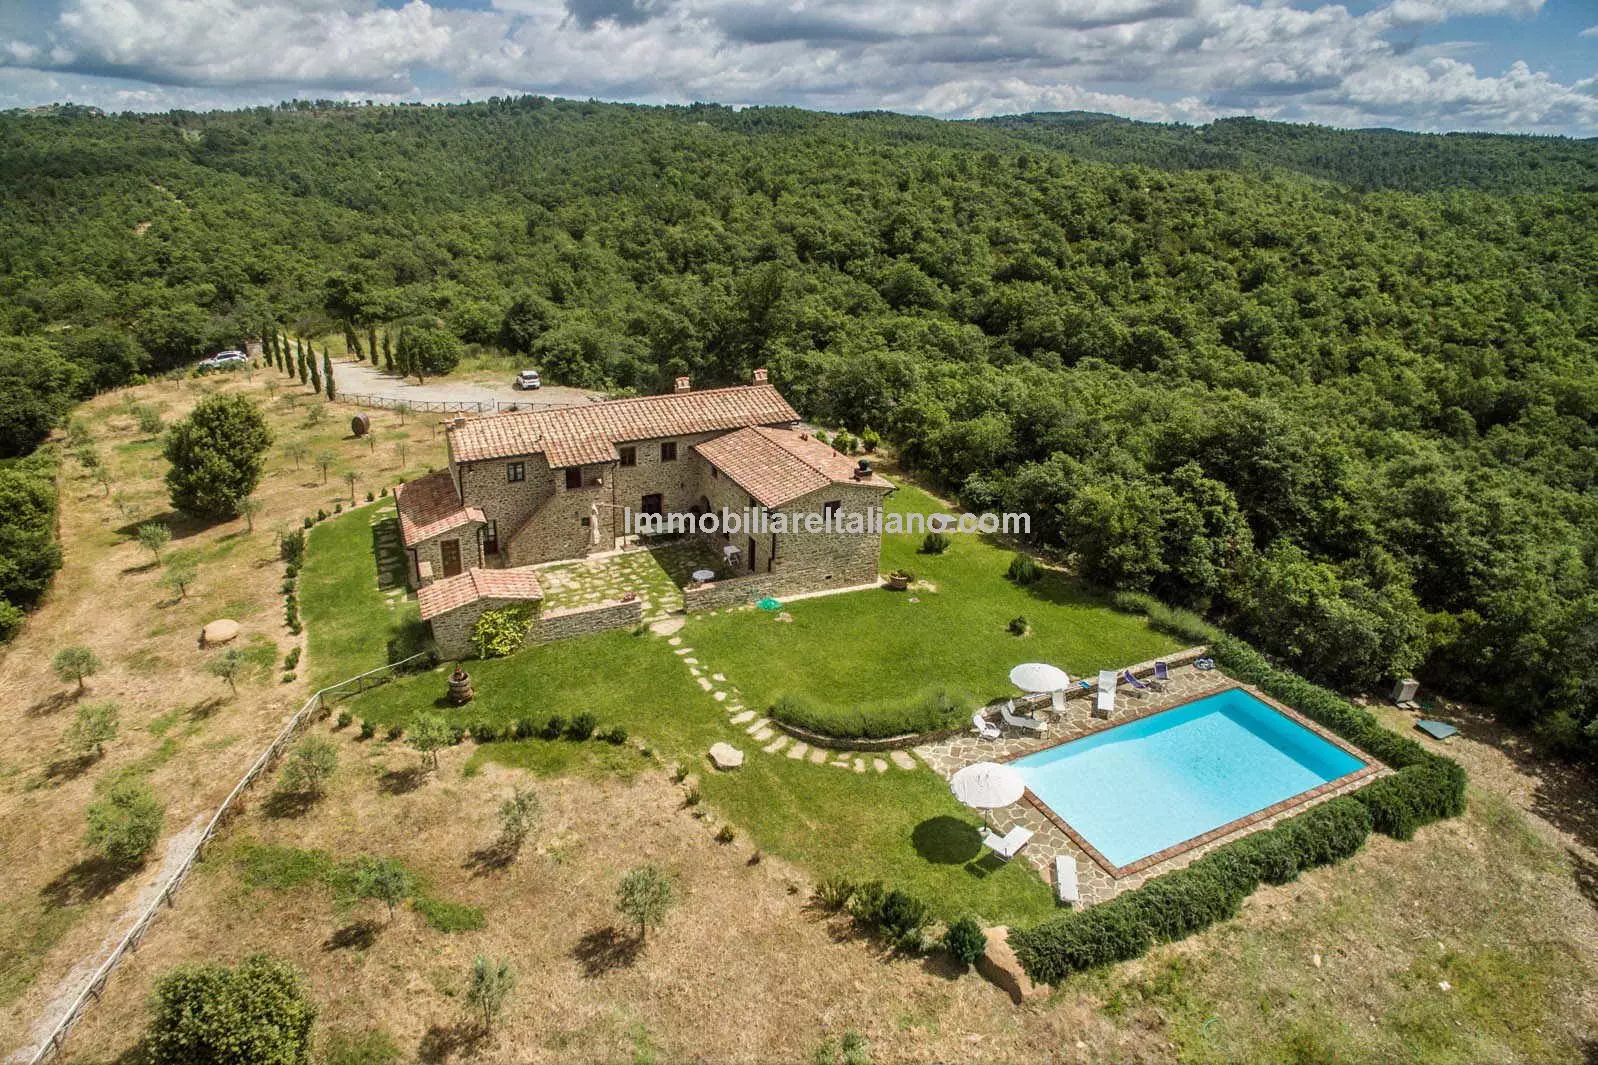 SOLDFarmhouse in Tuscany with courtyard, pool, woodland and olive grove